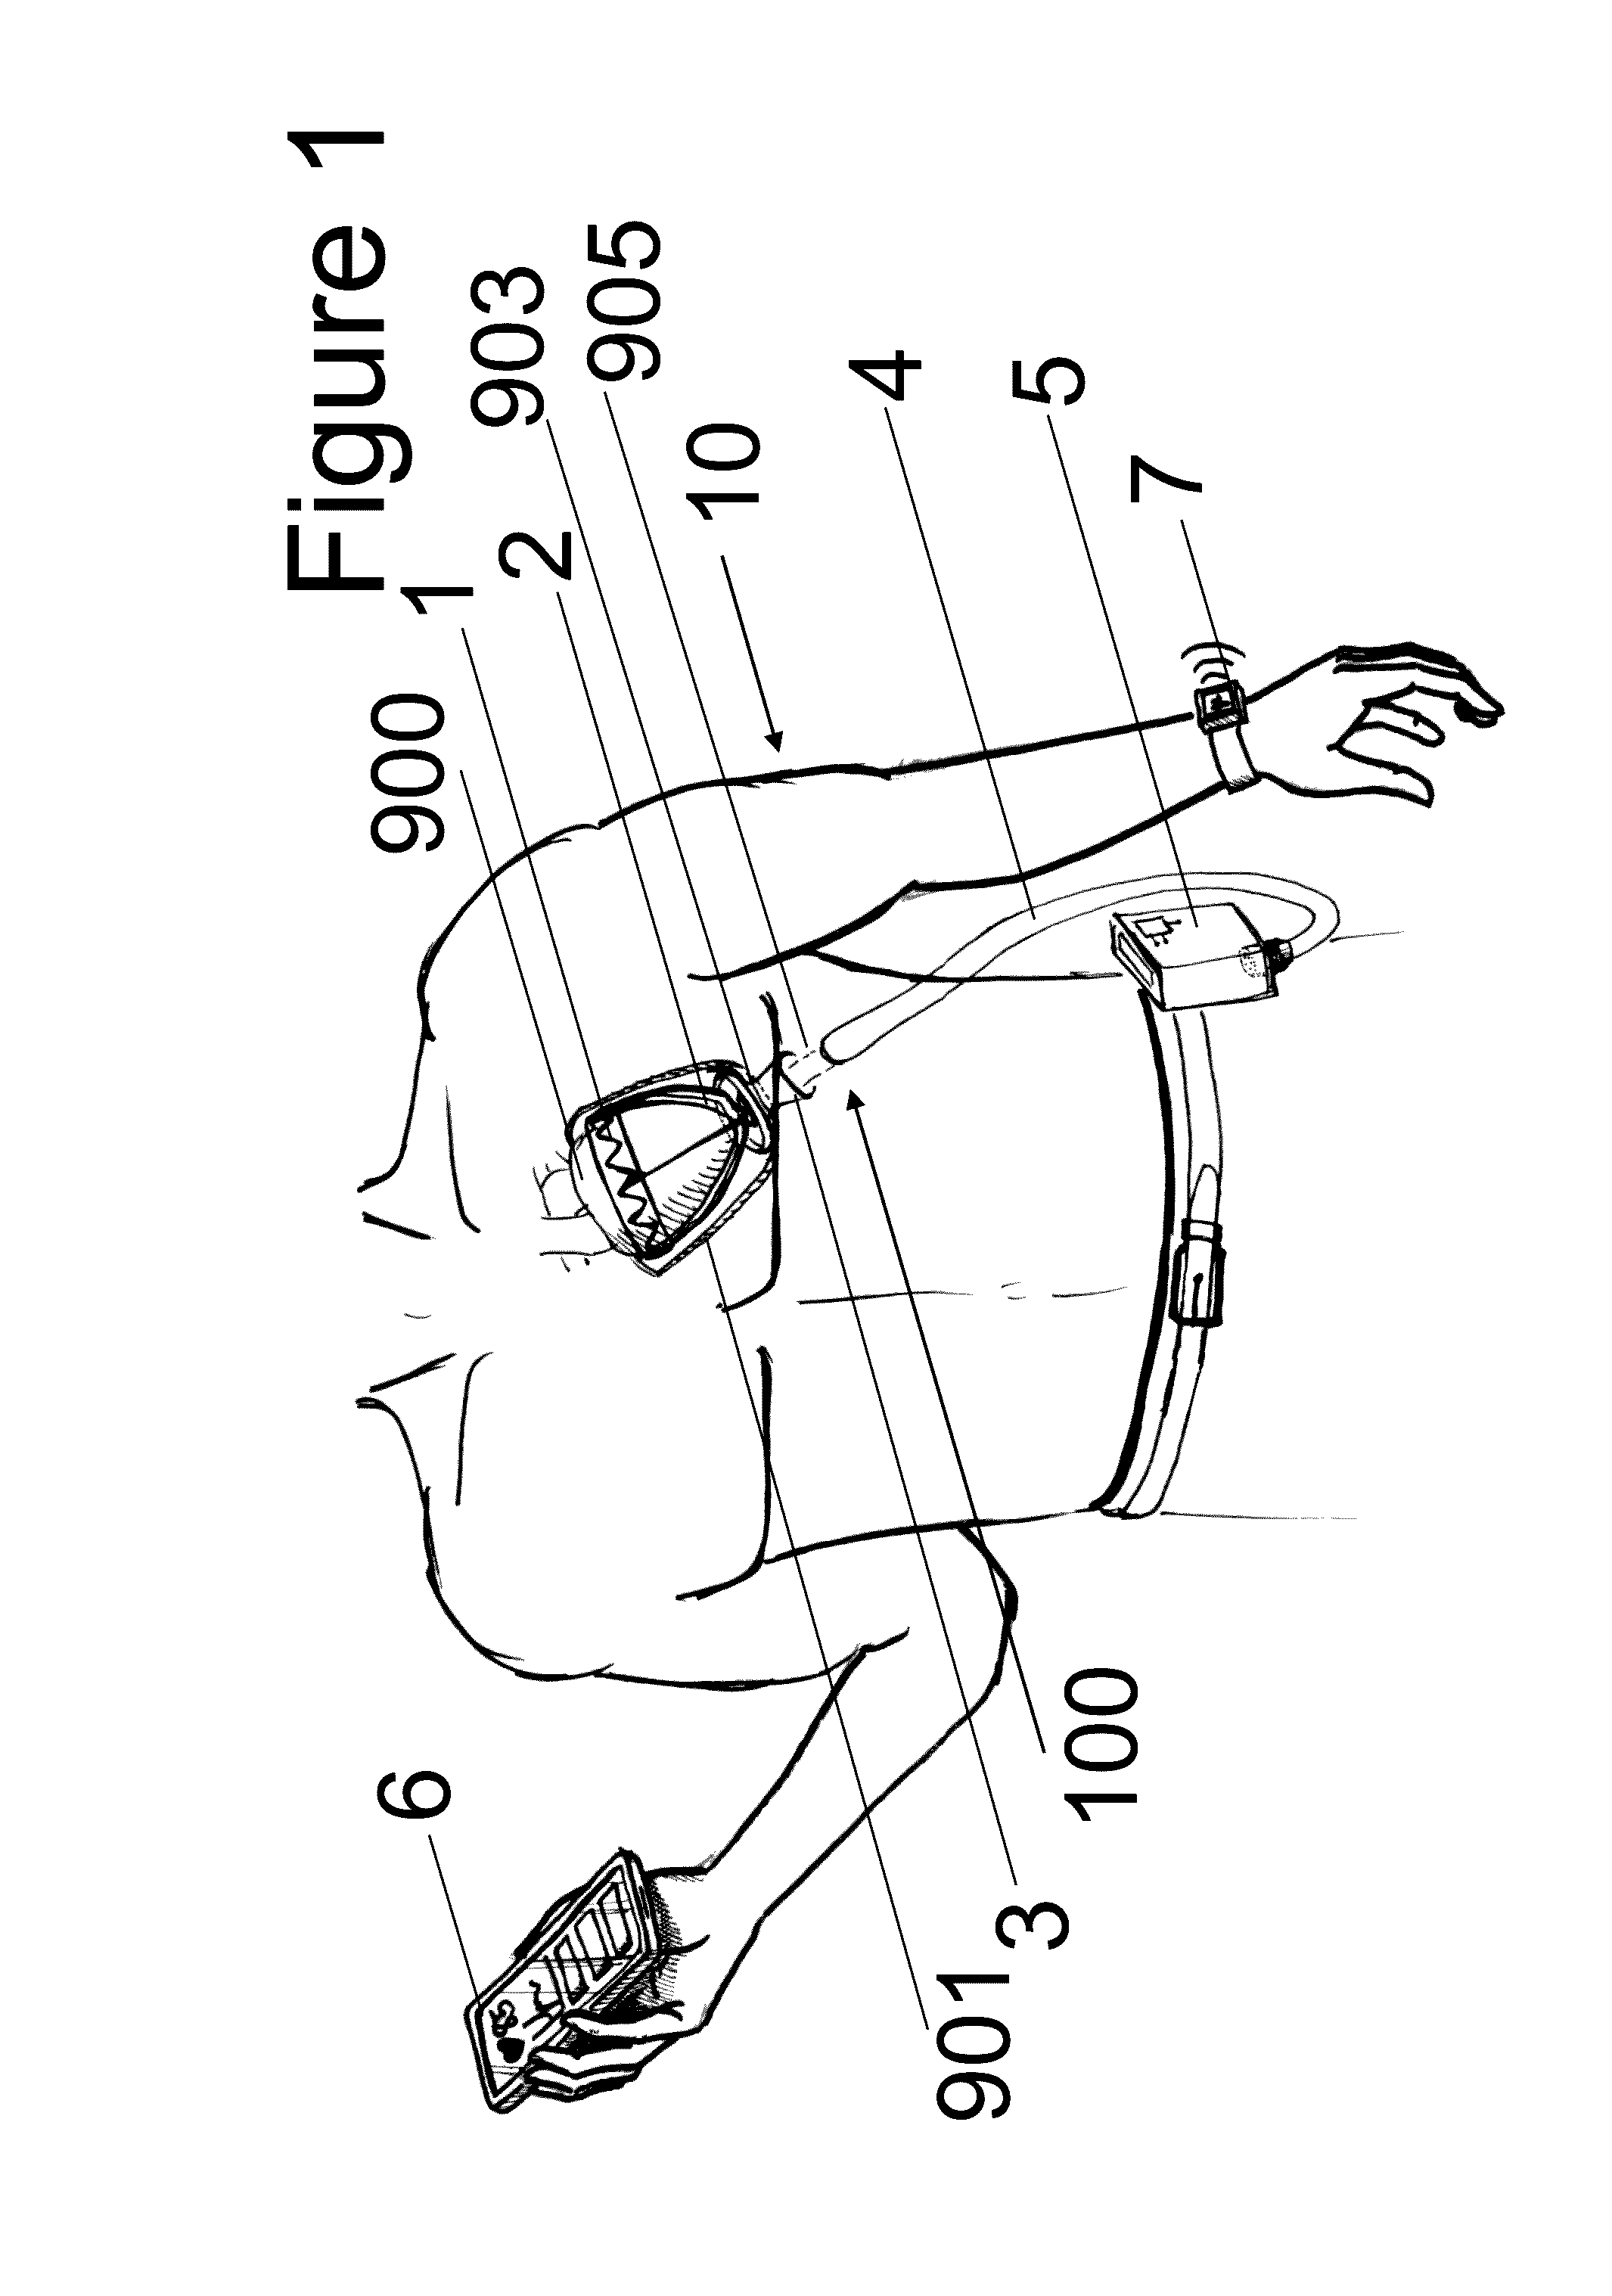 Implantable device for the locationally accurate delivery and administration of substances into the pericardium or onto the surface of the heart